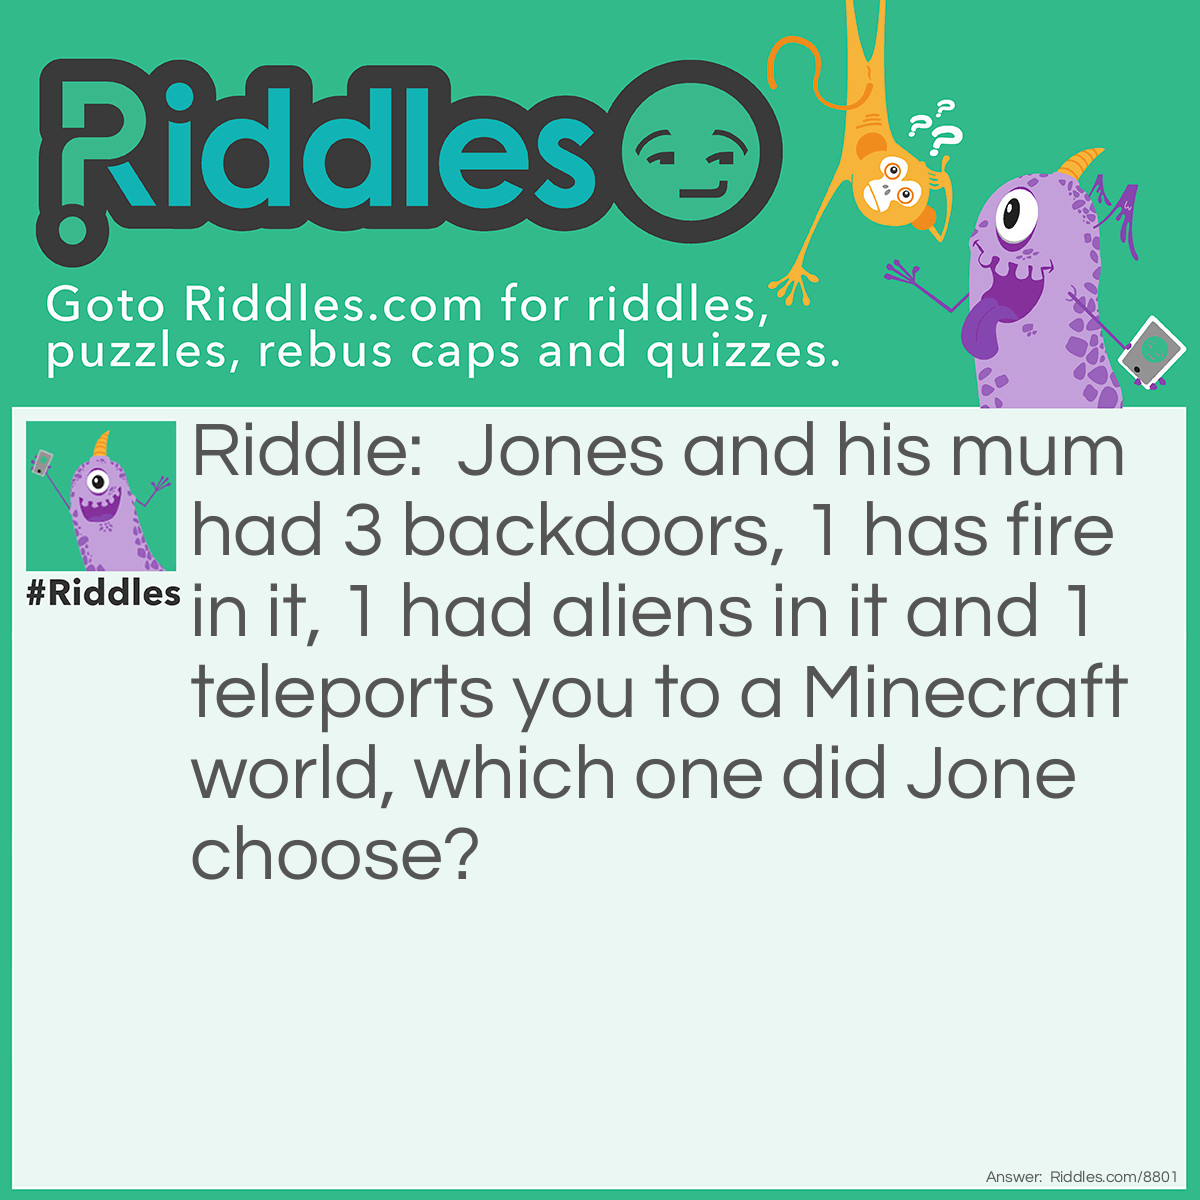 Riddle: Jones and his mum had 3 backdoors, 1 has fire in it, 1 had aliens in it and 1 teleports you to a Minecraft world, which one did Jone choose? Answer: Jone chose none of them, did I say that Jones and his mum wanted to get out of the house at the start? nope!